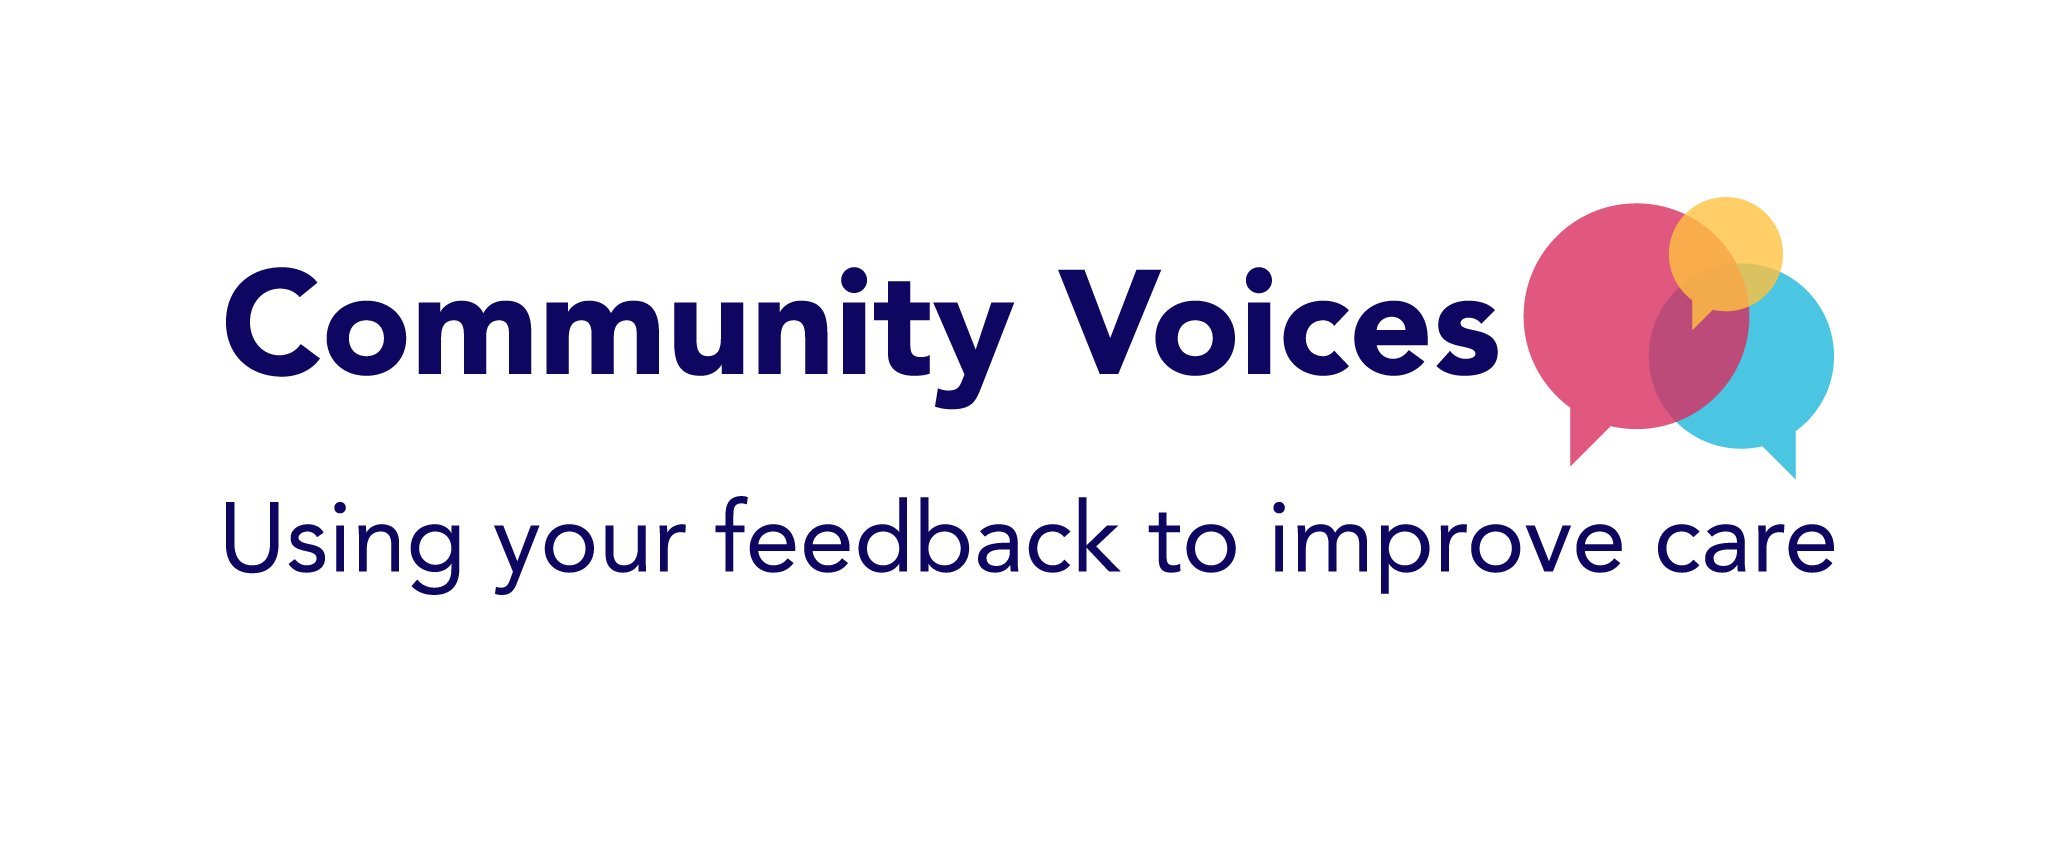 Community Voices Using your feedback to improve care